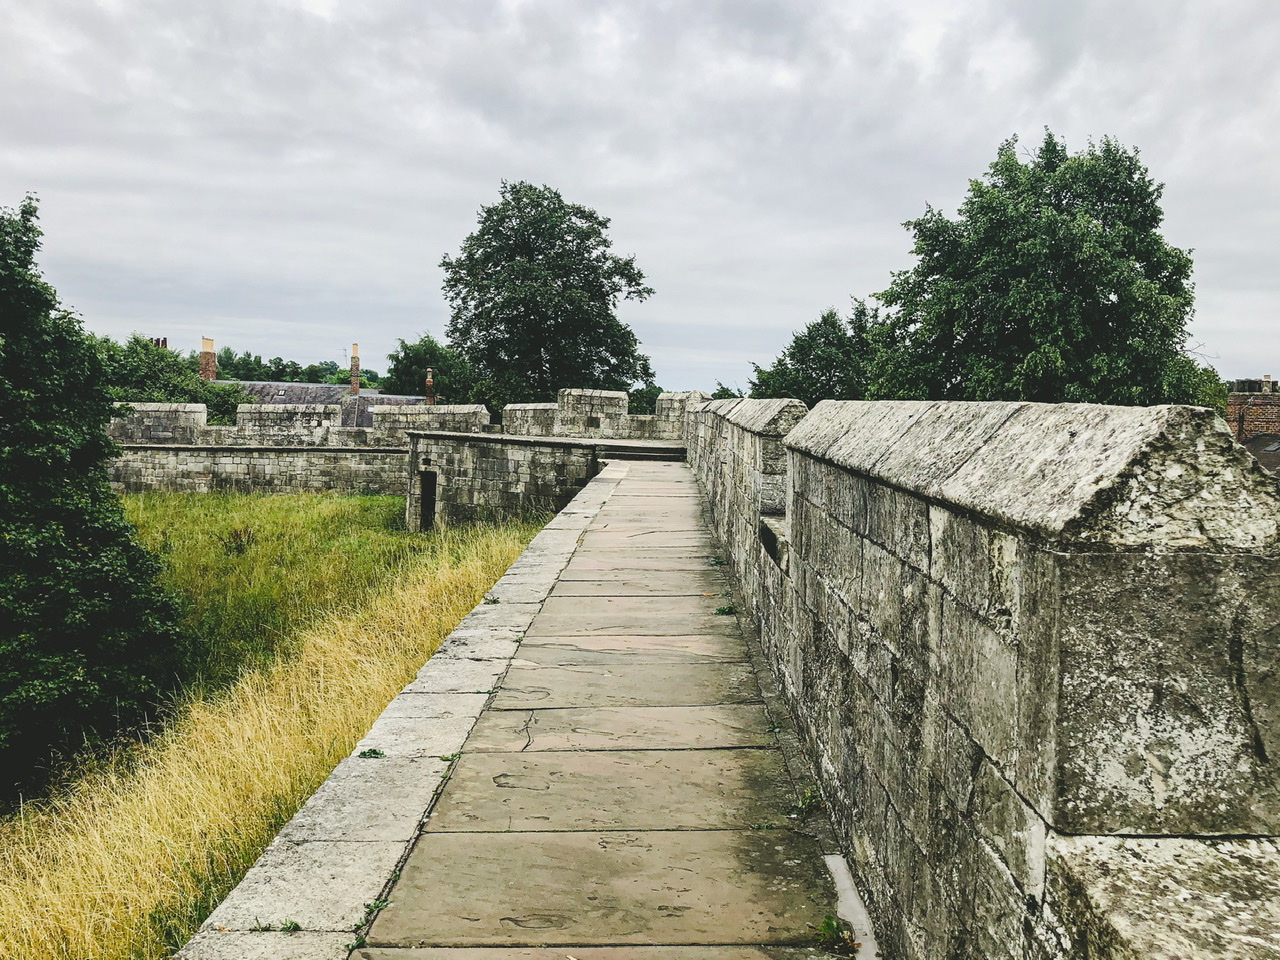 Paved footpath along the top of medieval city wall with green grass on left and wall on right